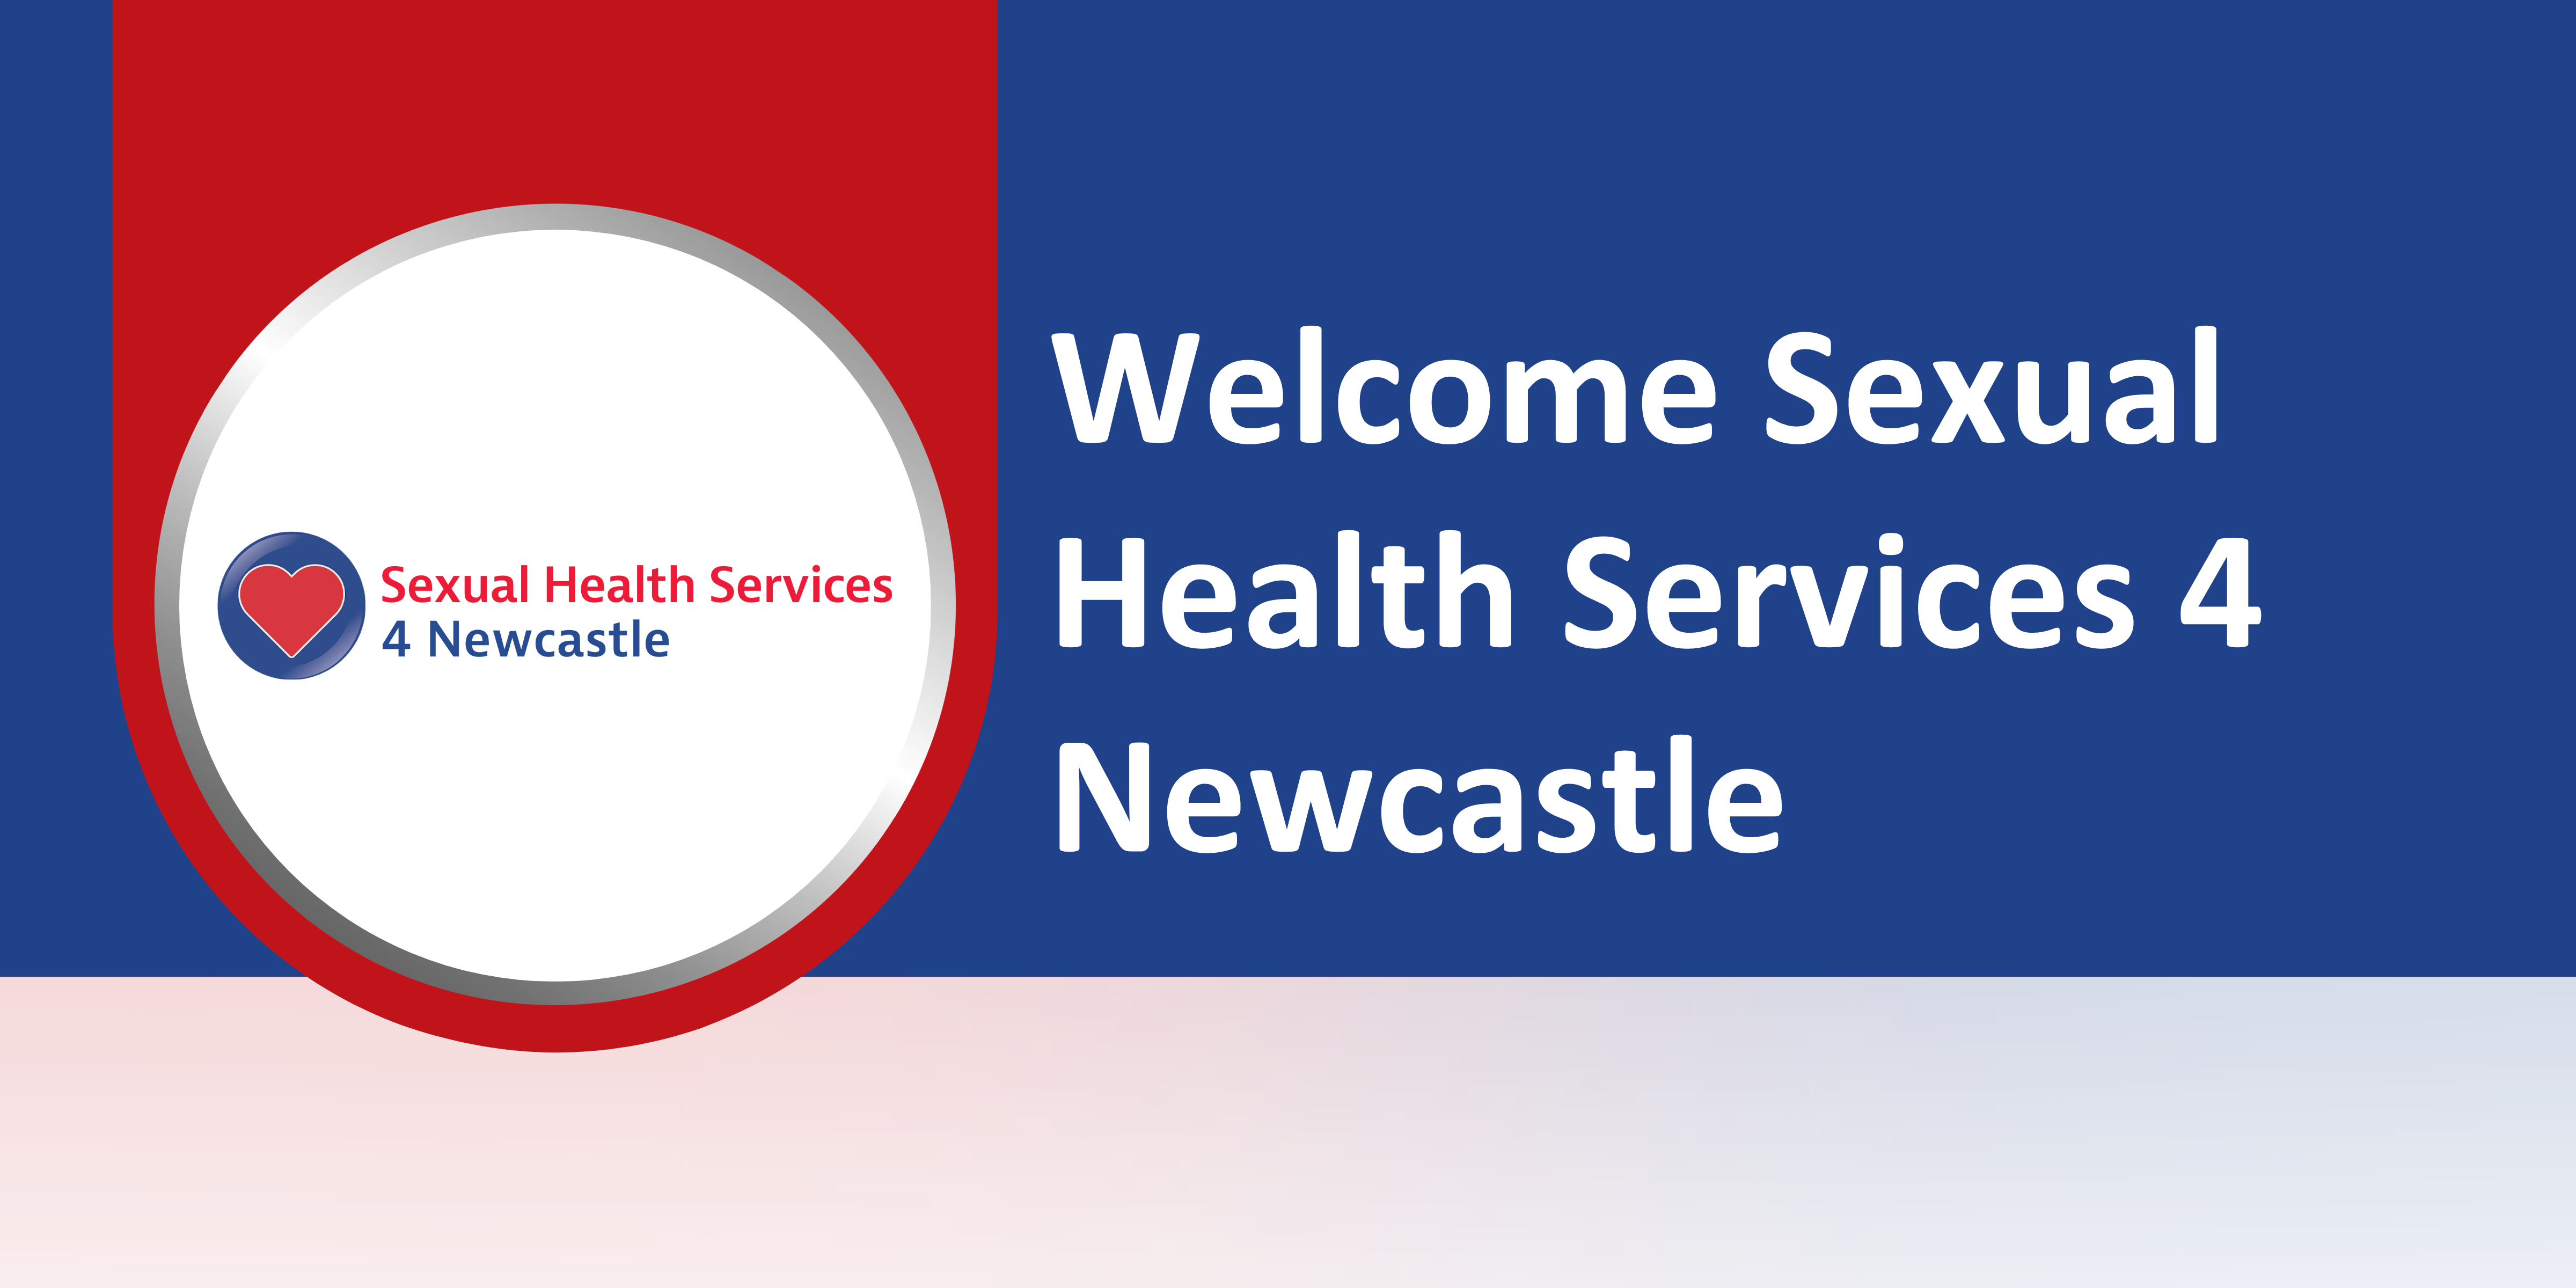 Sexual Health Services 4 Newcastle Launches Solutions 4 Health